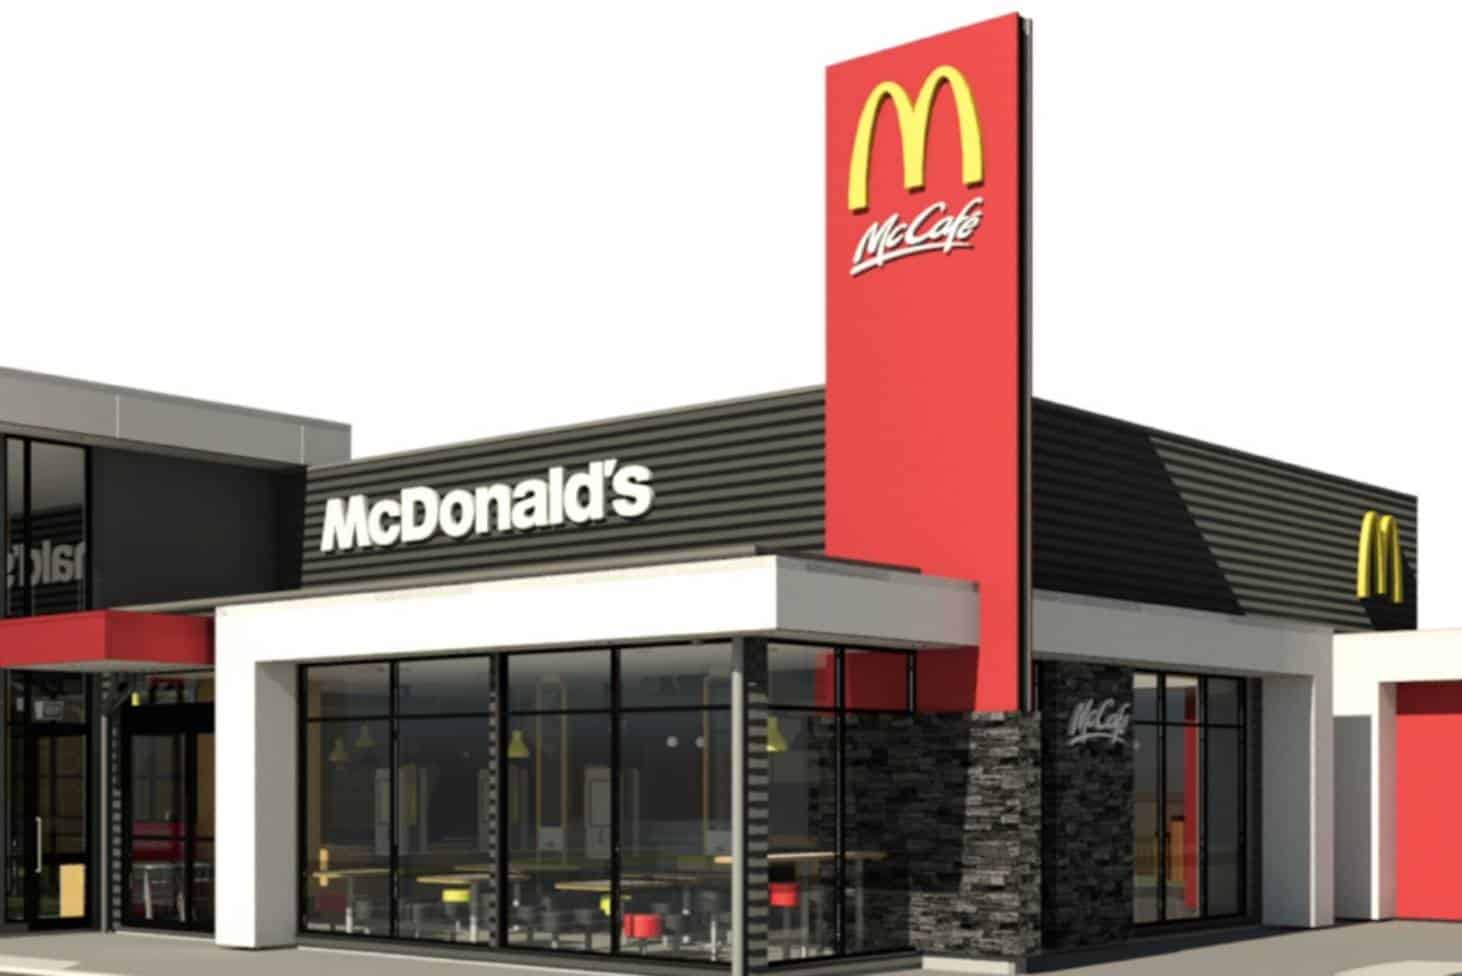 McDonald’s is planning to enter the metaverse with virtual restaurant